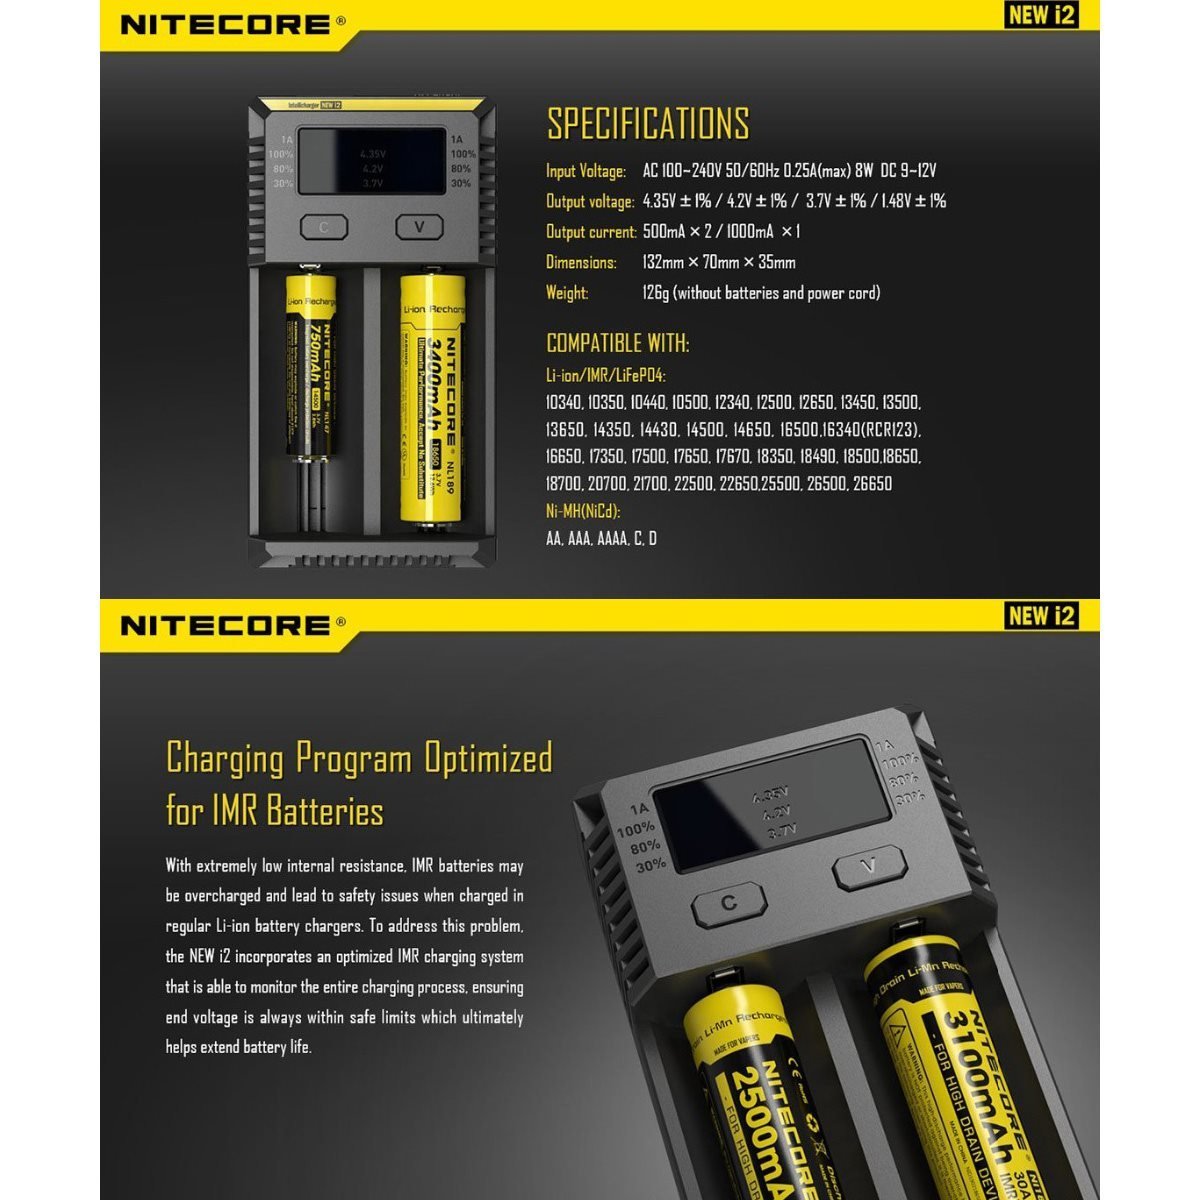 NITECORE New i2 Intellicharger 2 Bay Rechargeable Battery Charger